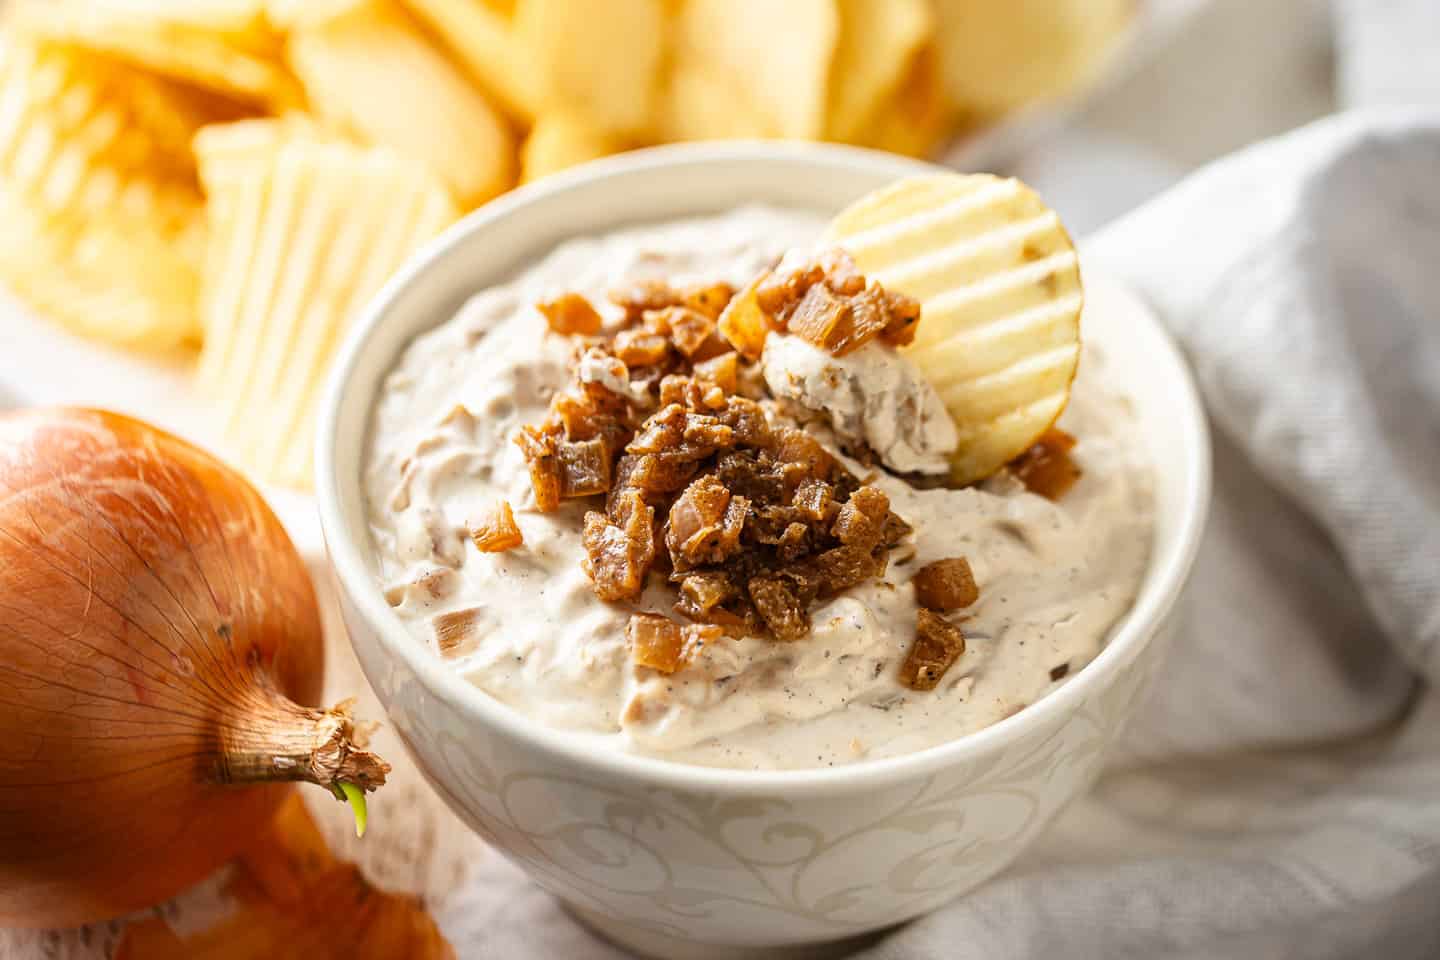 Dipping a potato chip into a bowl of caramelized onion dip.